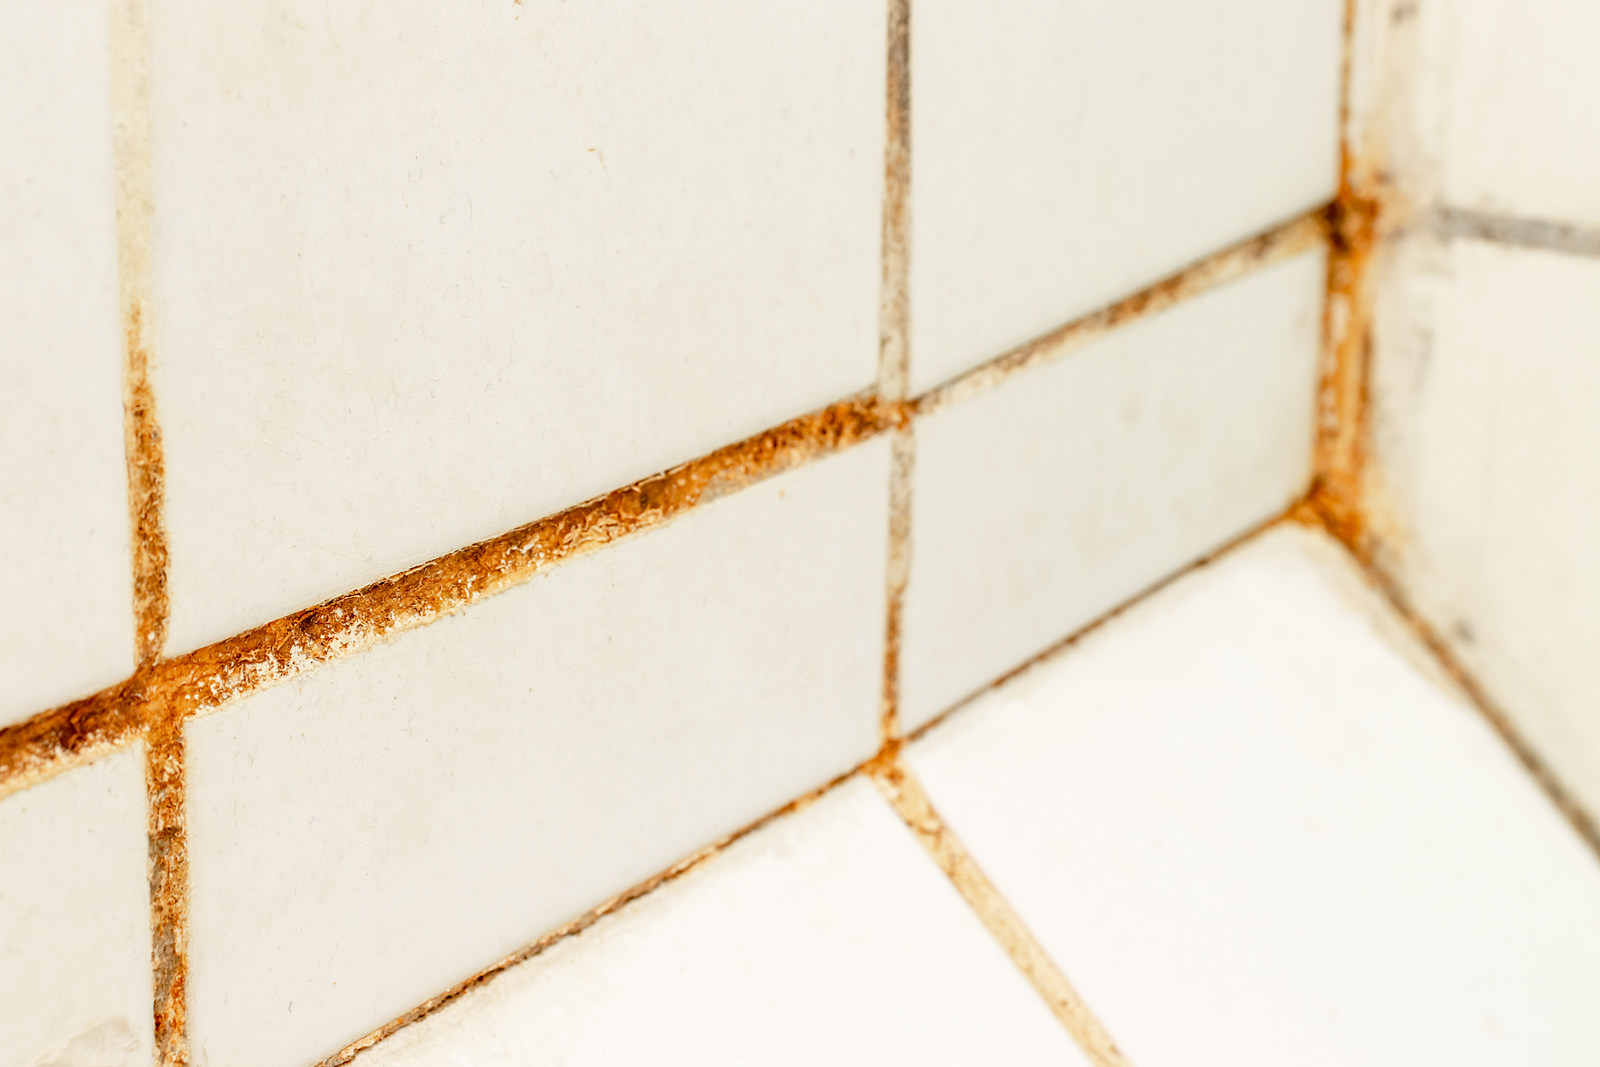 How to Remove Candle Wax from Grout Lines, Grout Shield